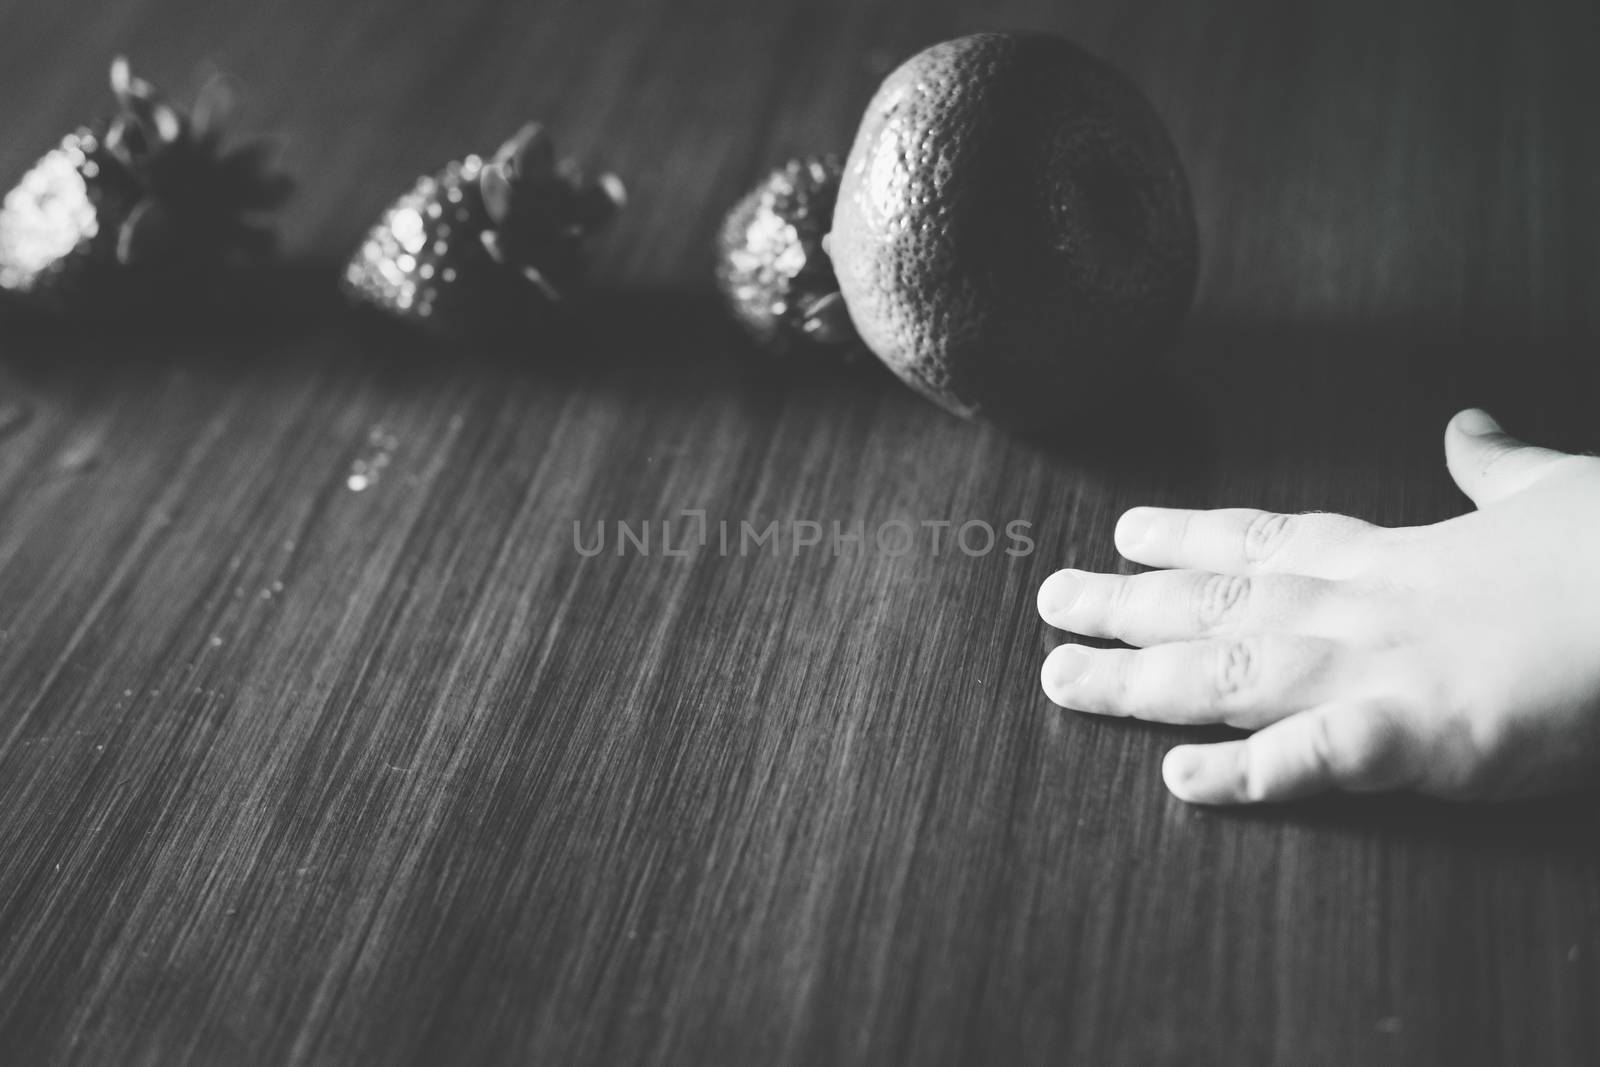 Light hand in contrast with dark straeberries and a tangerine forming a line on the table